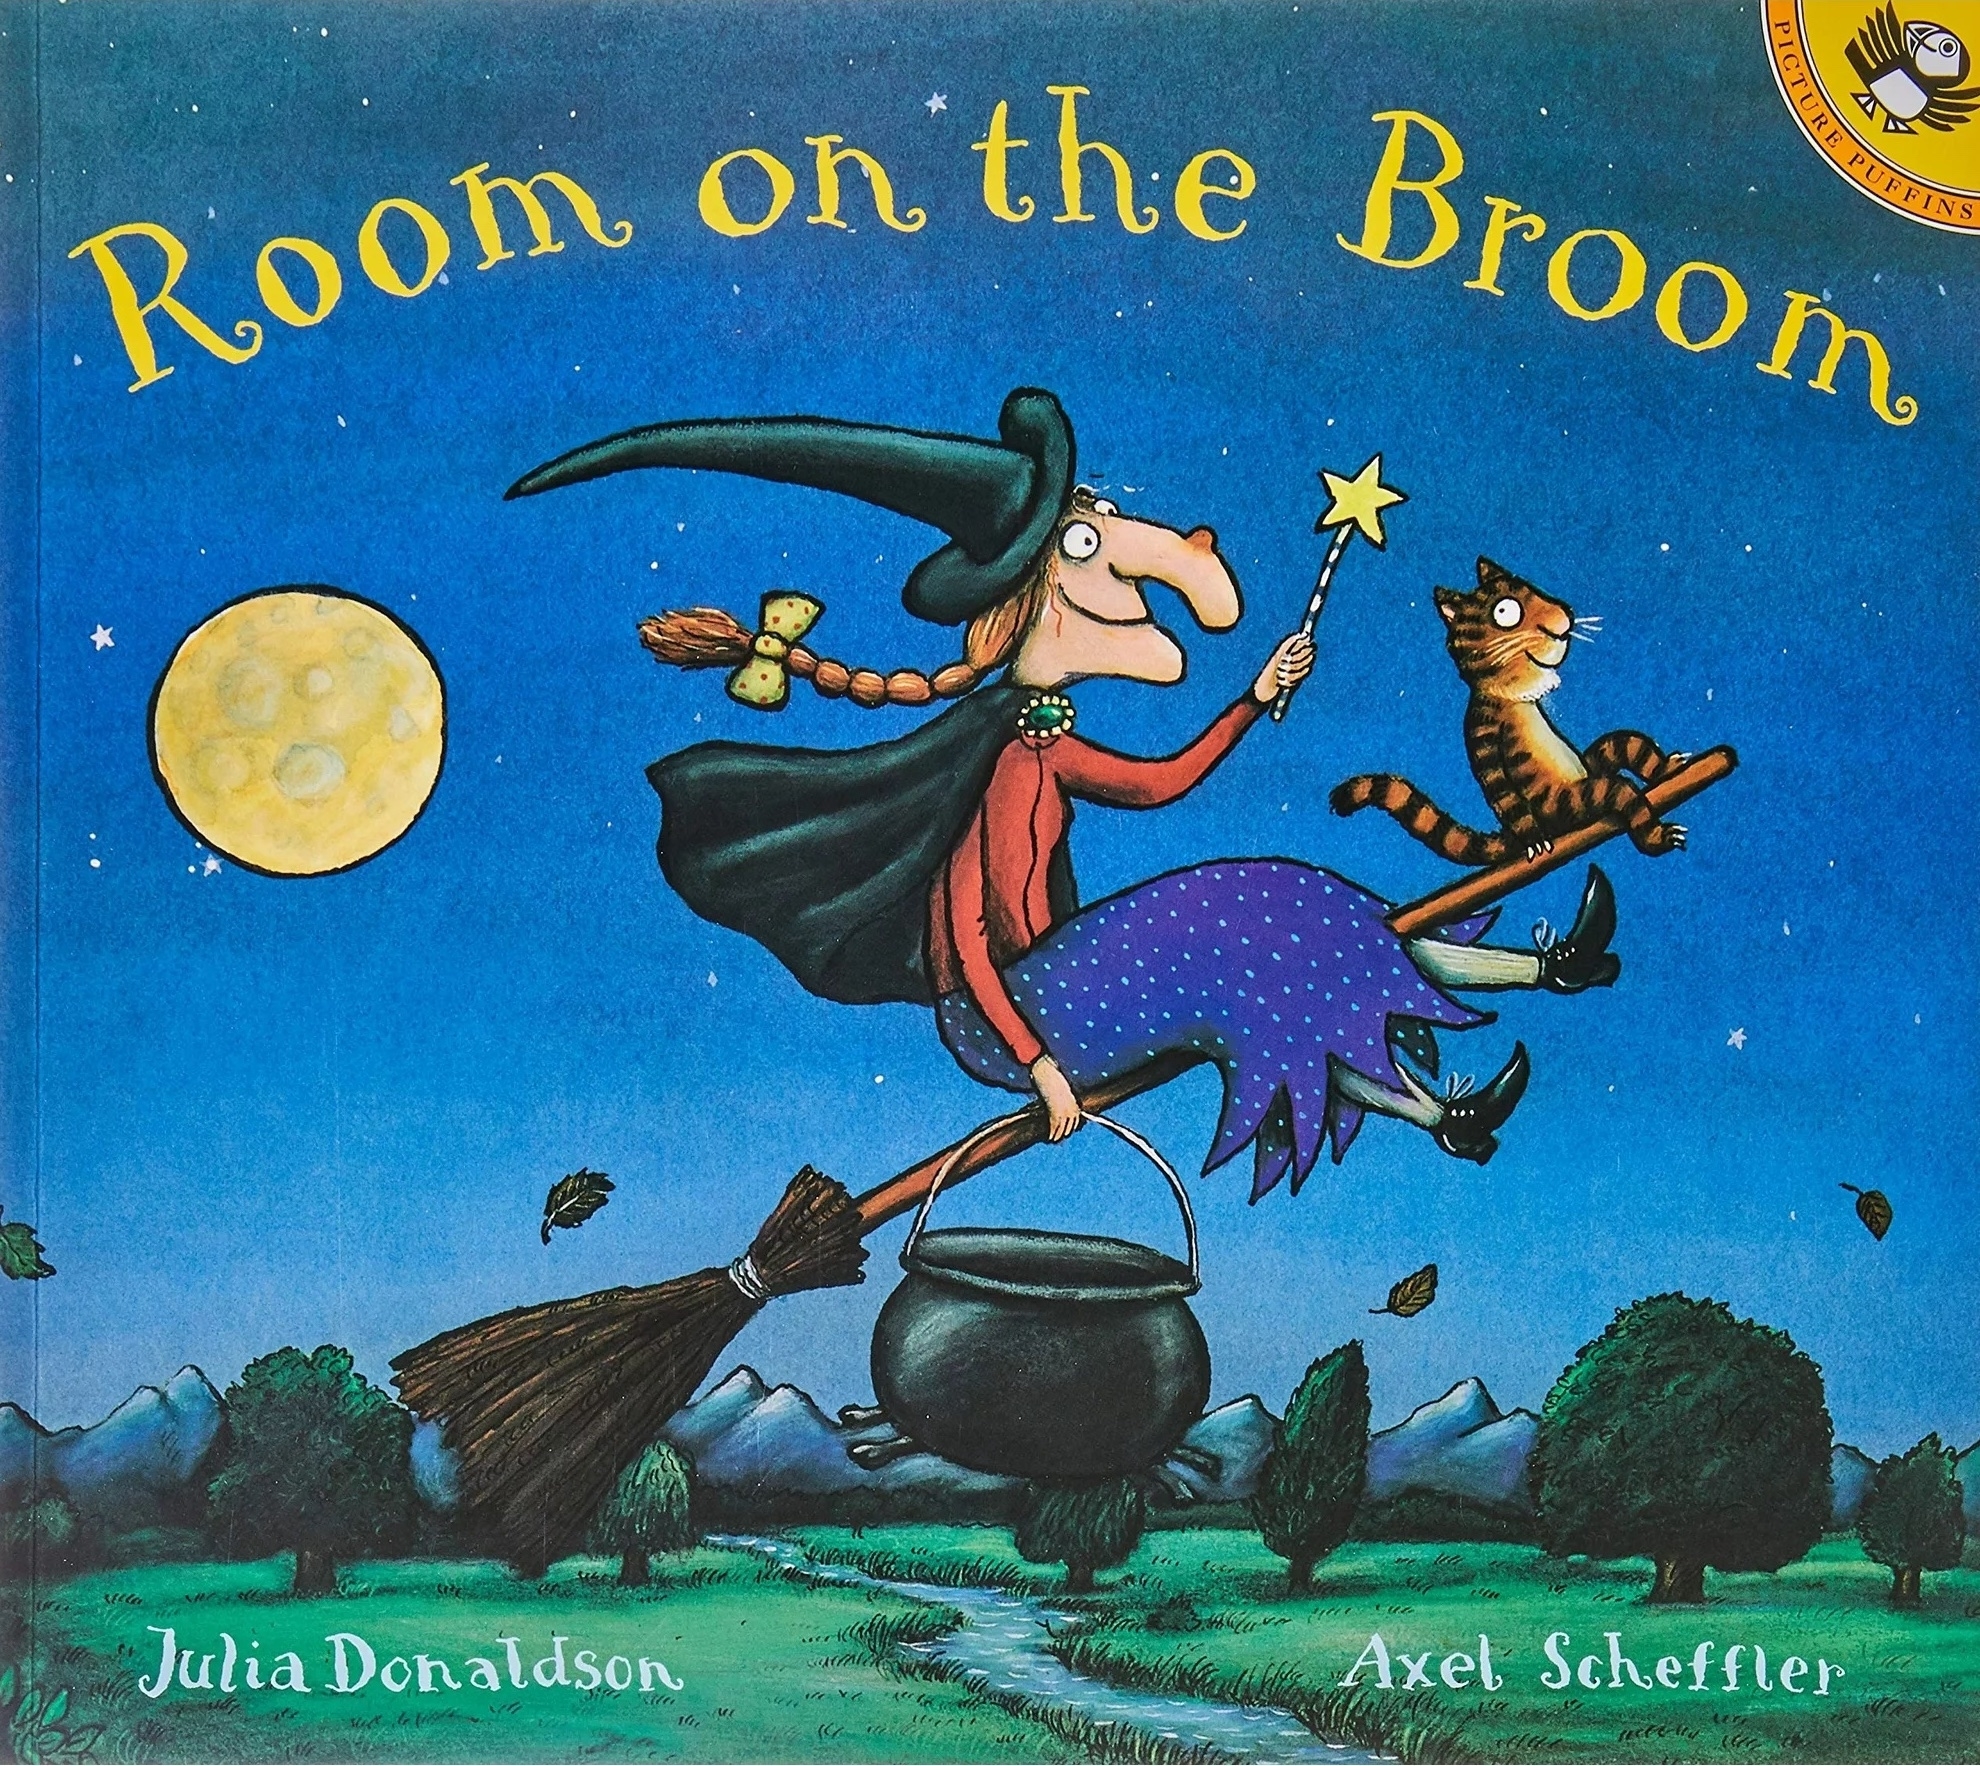 the cover of Room on the Broom